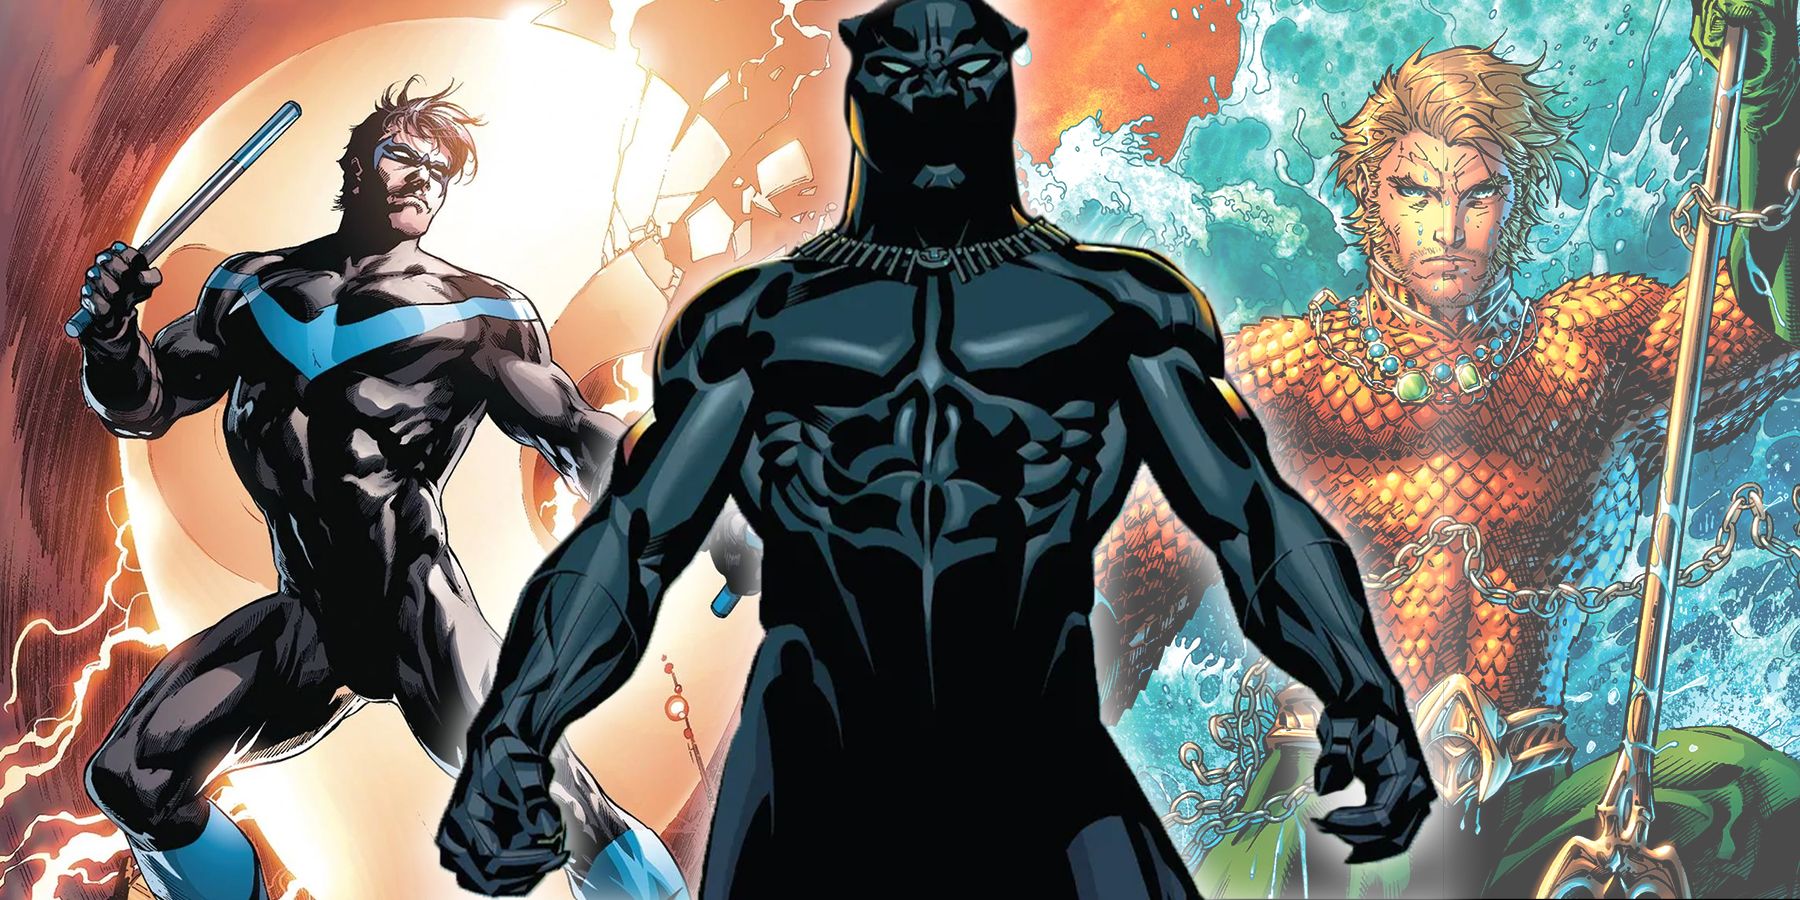 Black Superheroes Who Could Be The Next Black Panther